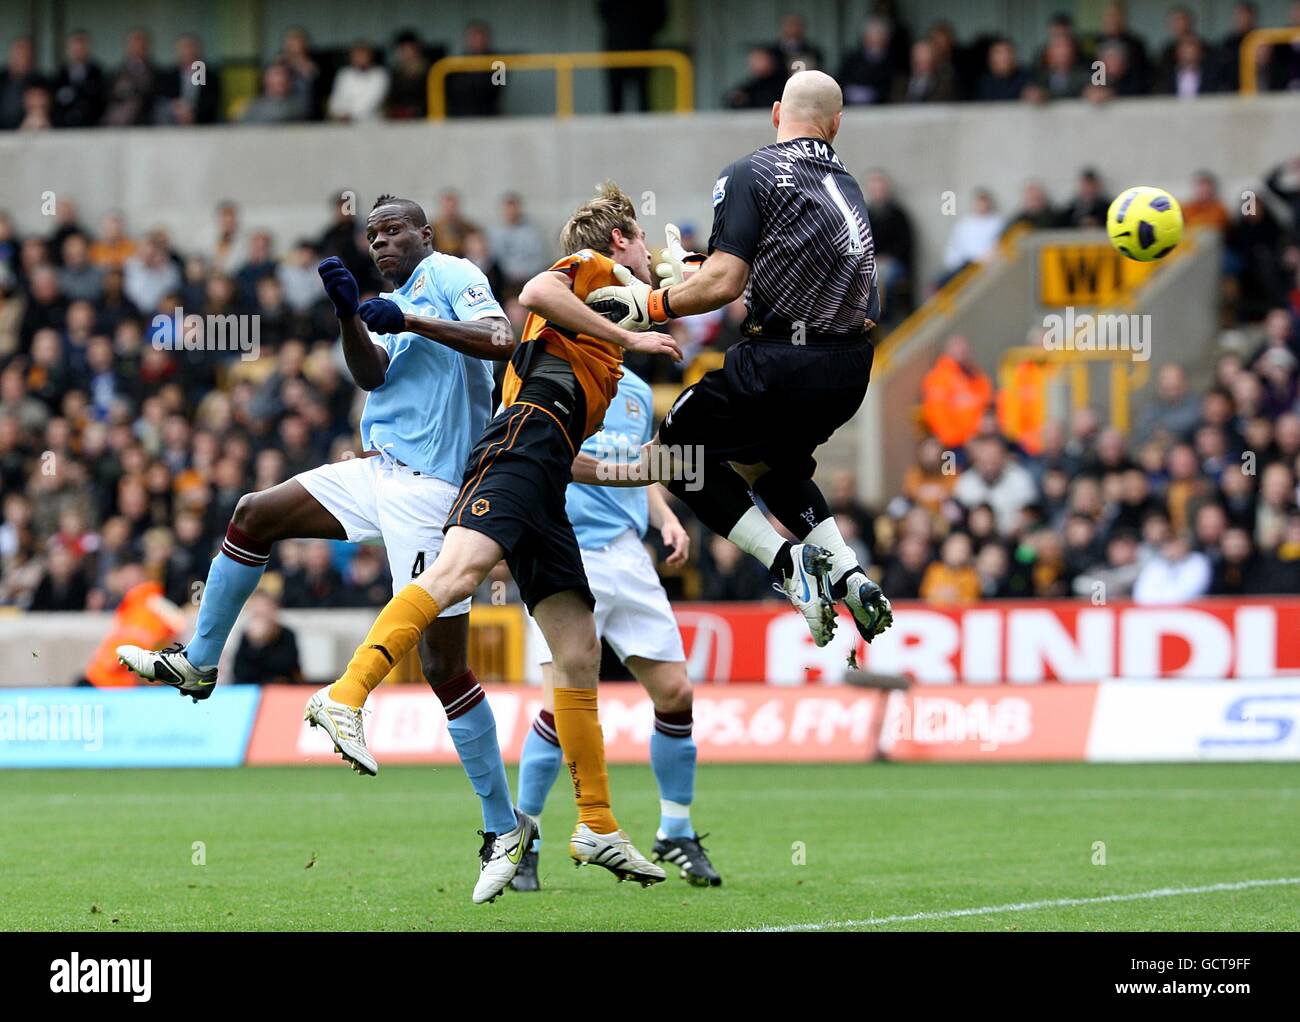 Soccer - Barclays Premier League - Wolverhampton Wanderers v Manchester City - Molineux. Manchester City's Mario Balotelli (left) attempts to head the ball past Wolverhampton Wanderers goalkeeper Marcus Hahnemann (right) Stock Photo